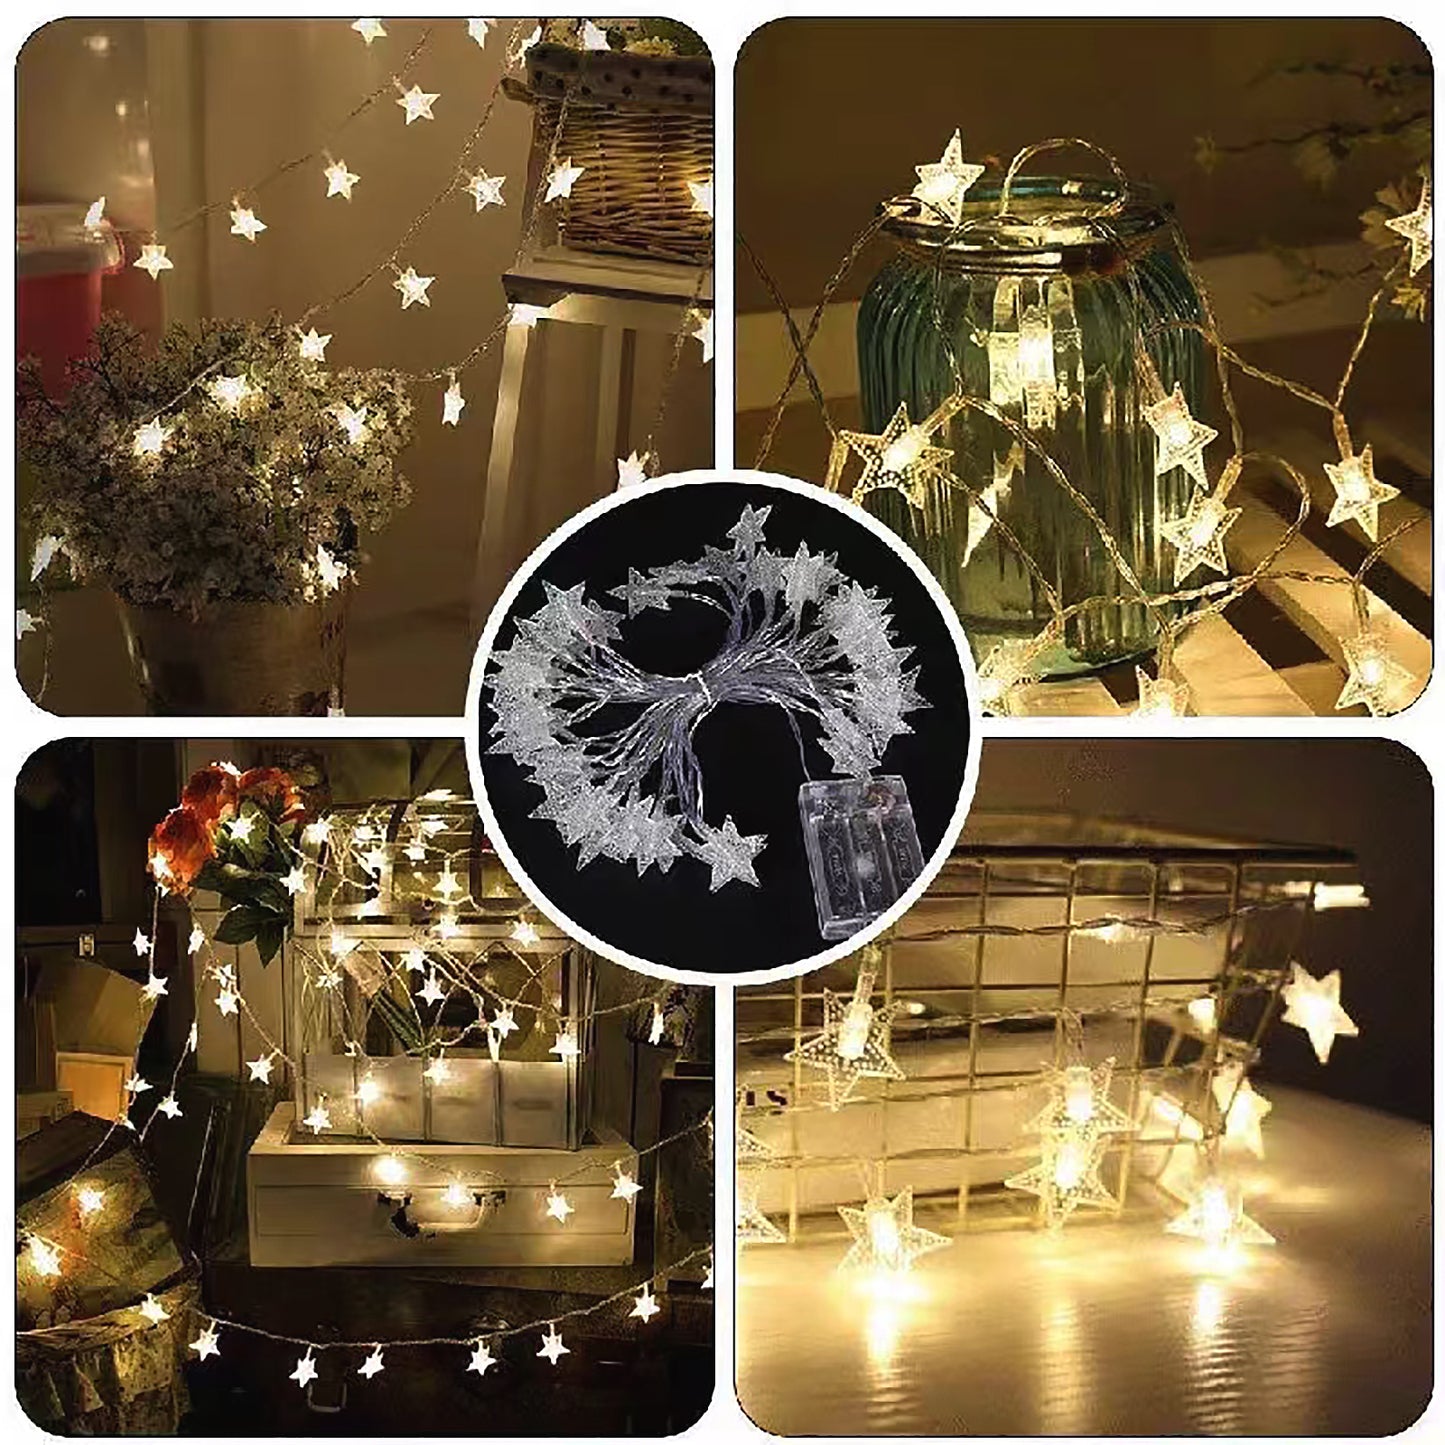 Star led Lights,Girls Room Decor Aesthetic Romantic Christmas Tree Decorations Indoor & Outdoor 2 Pack 10FT Fairy Night Light with Sound Remote Control Warm White